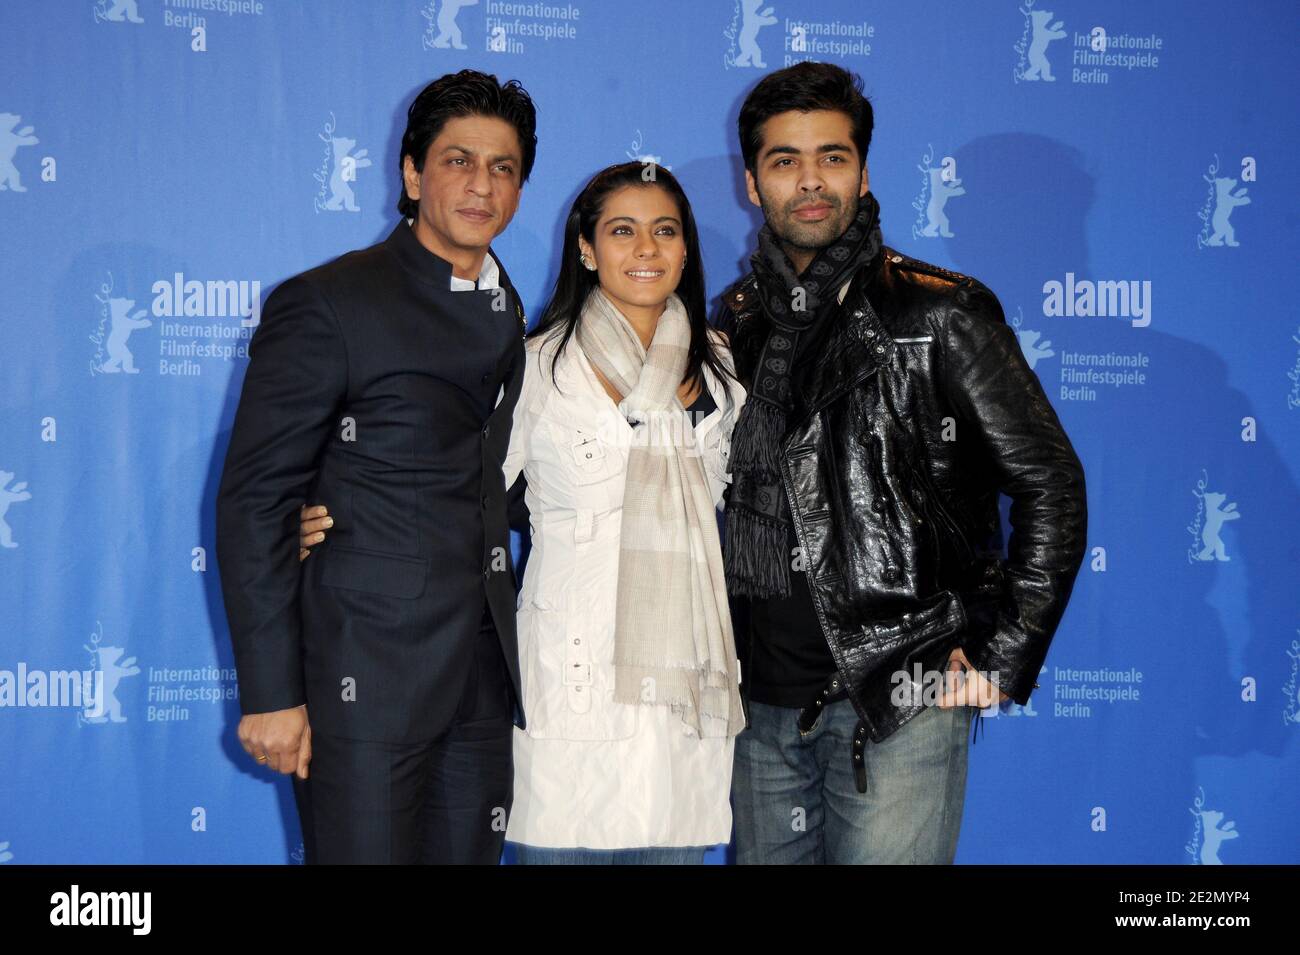 Shah Rukh Khan, Kajol Devgan and Karan Johar during a photocall for 'My name is Khan' as part of the 60th Berlin Film Festival at the Grand Hyatt Hotel in Berlin, Germany on February 12, 2010. Photo by Nicolas Briquet/ABACAPRESS.COM Stock Photo